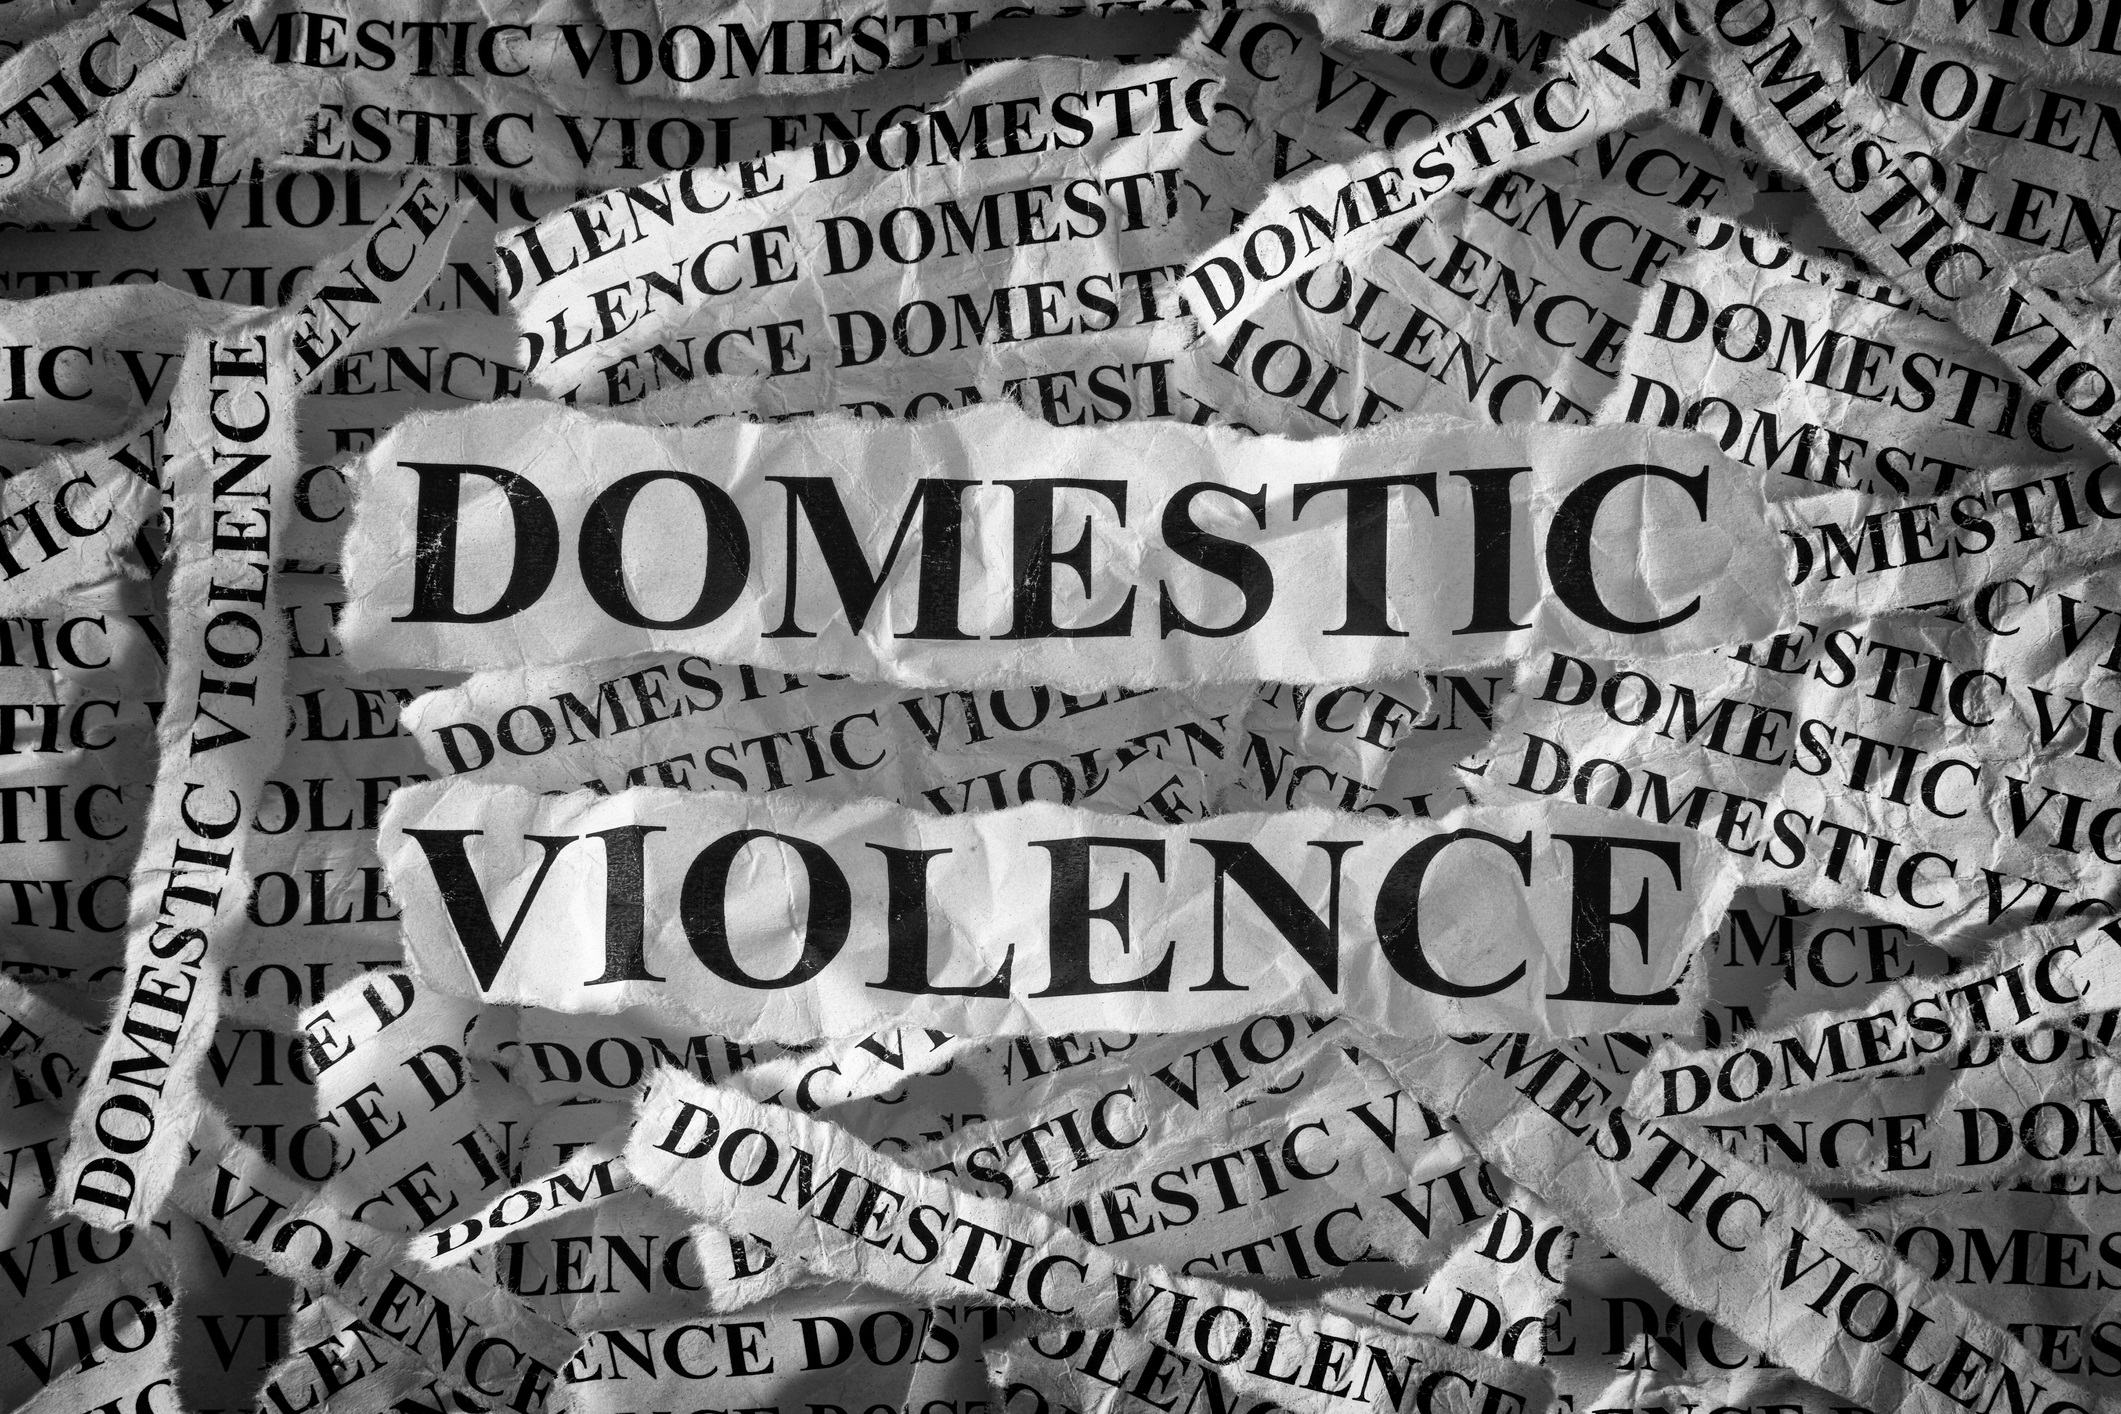 Search Warrants in NJ Domestic Violence Cases Must Have Probable Cause